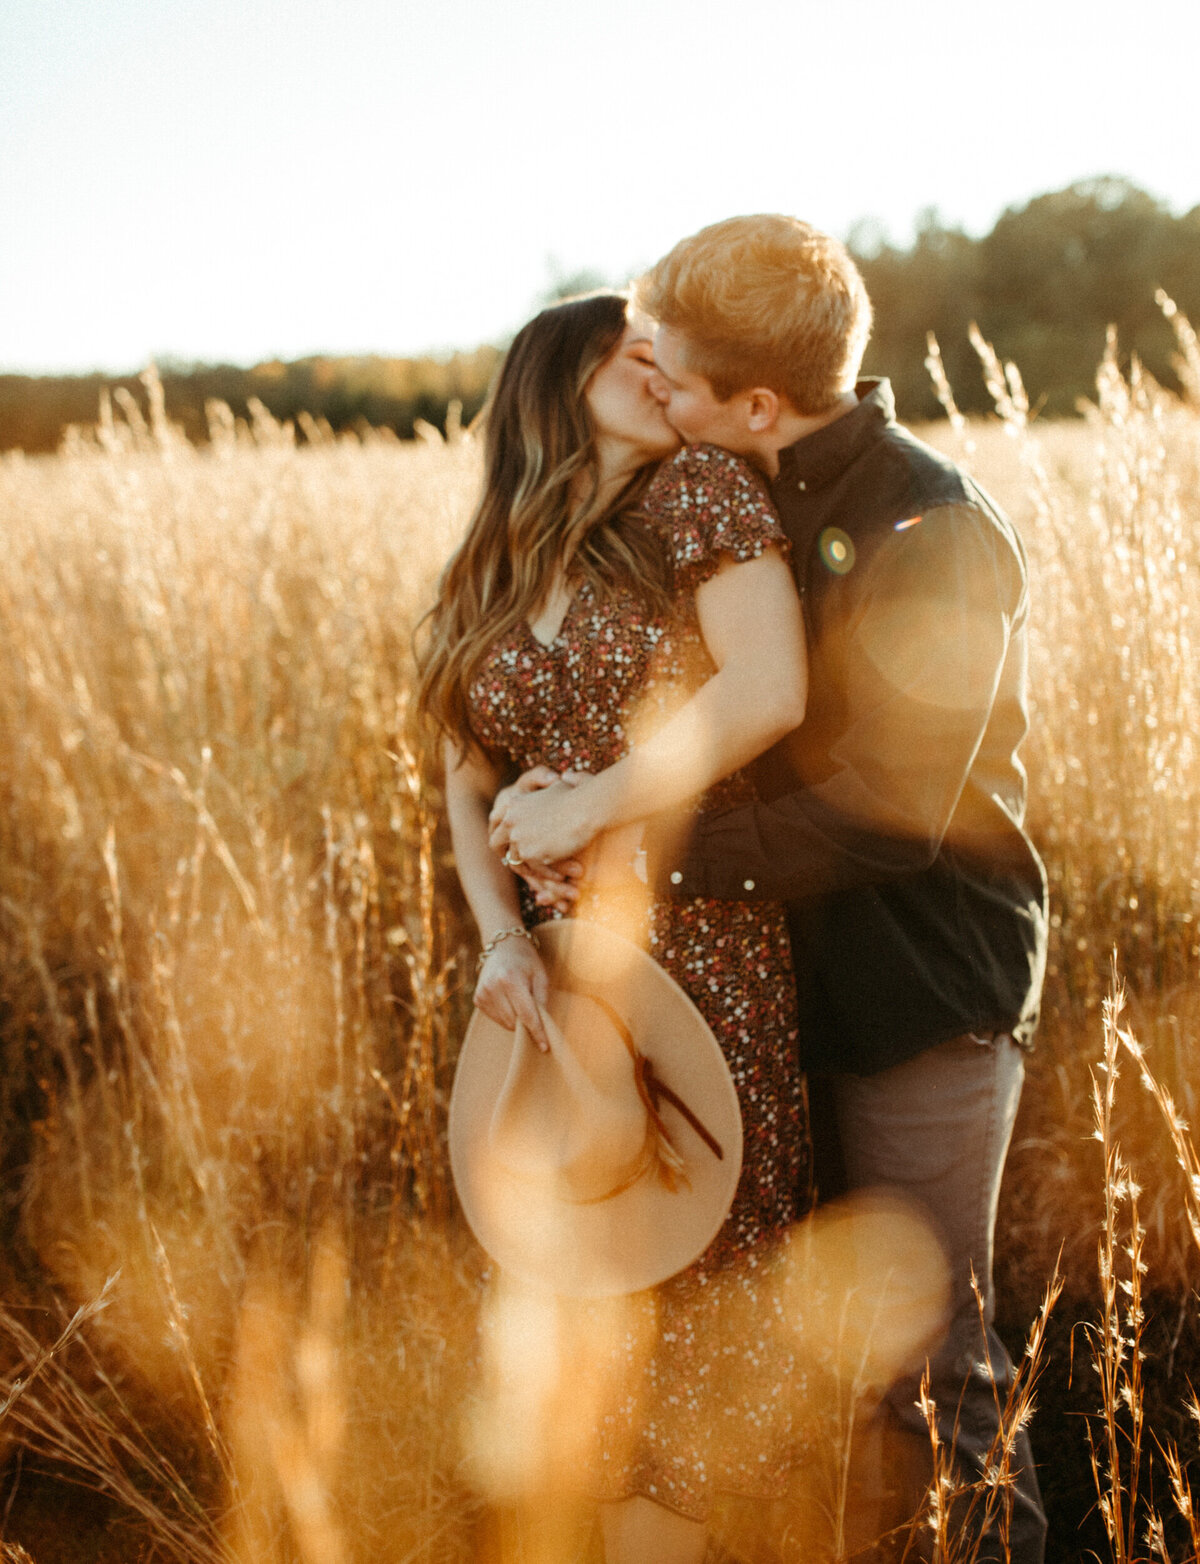 Girl wearing floral dress and holding boho hat is kissing her fiancé while he stands behind her and wraps his arms around her in a field with tall golden grass